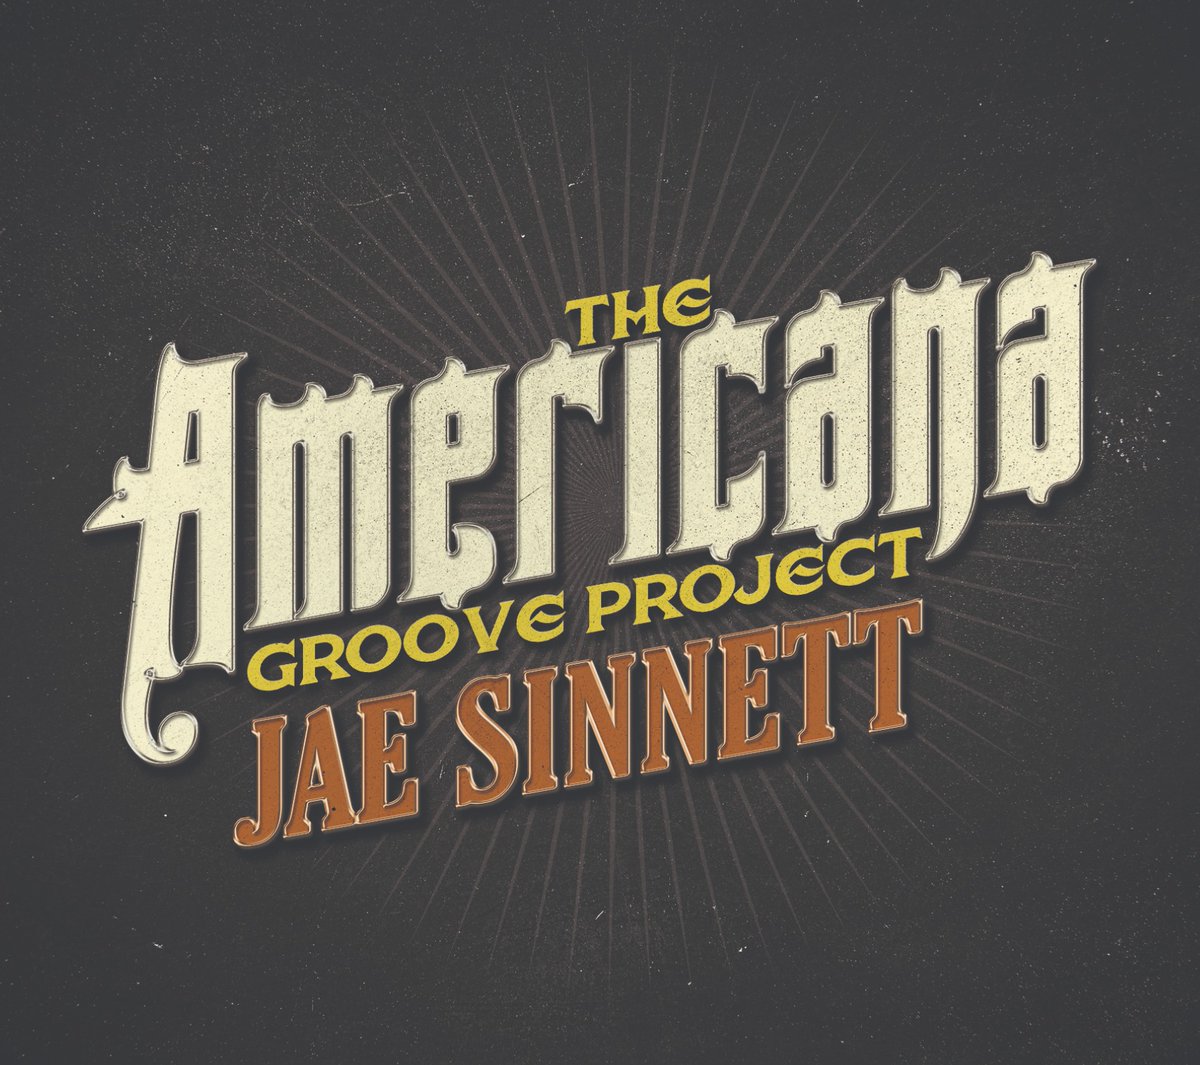 With “Americana,” Sinnett Plays Outside the Box